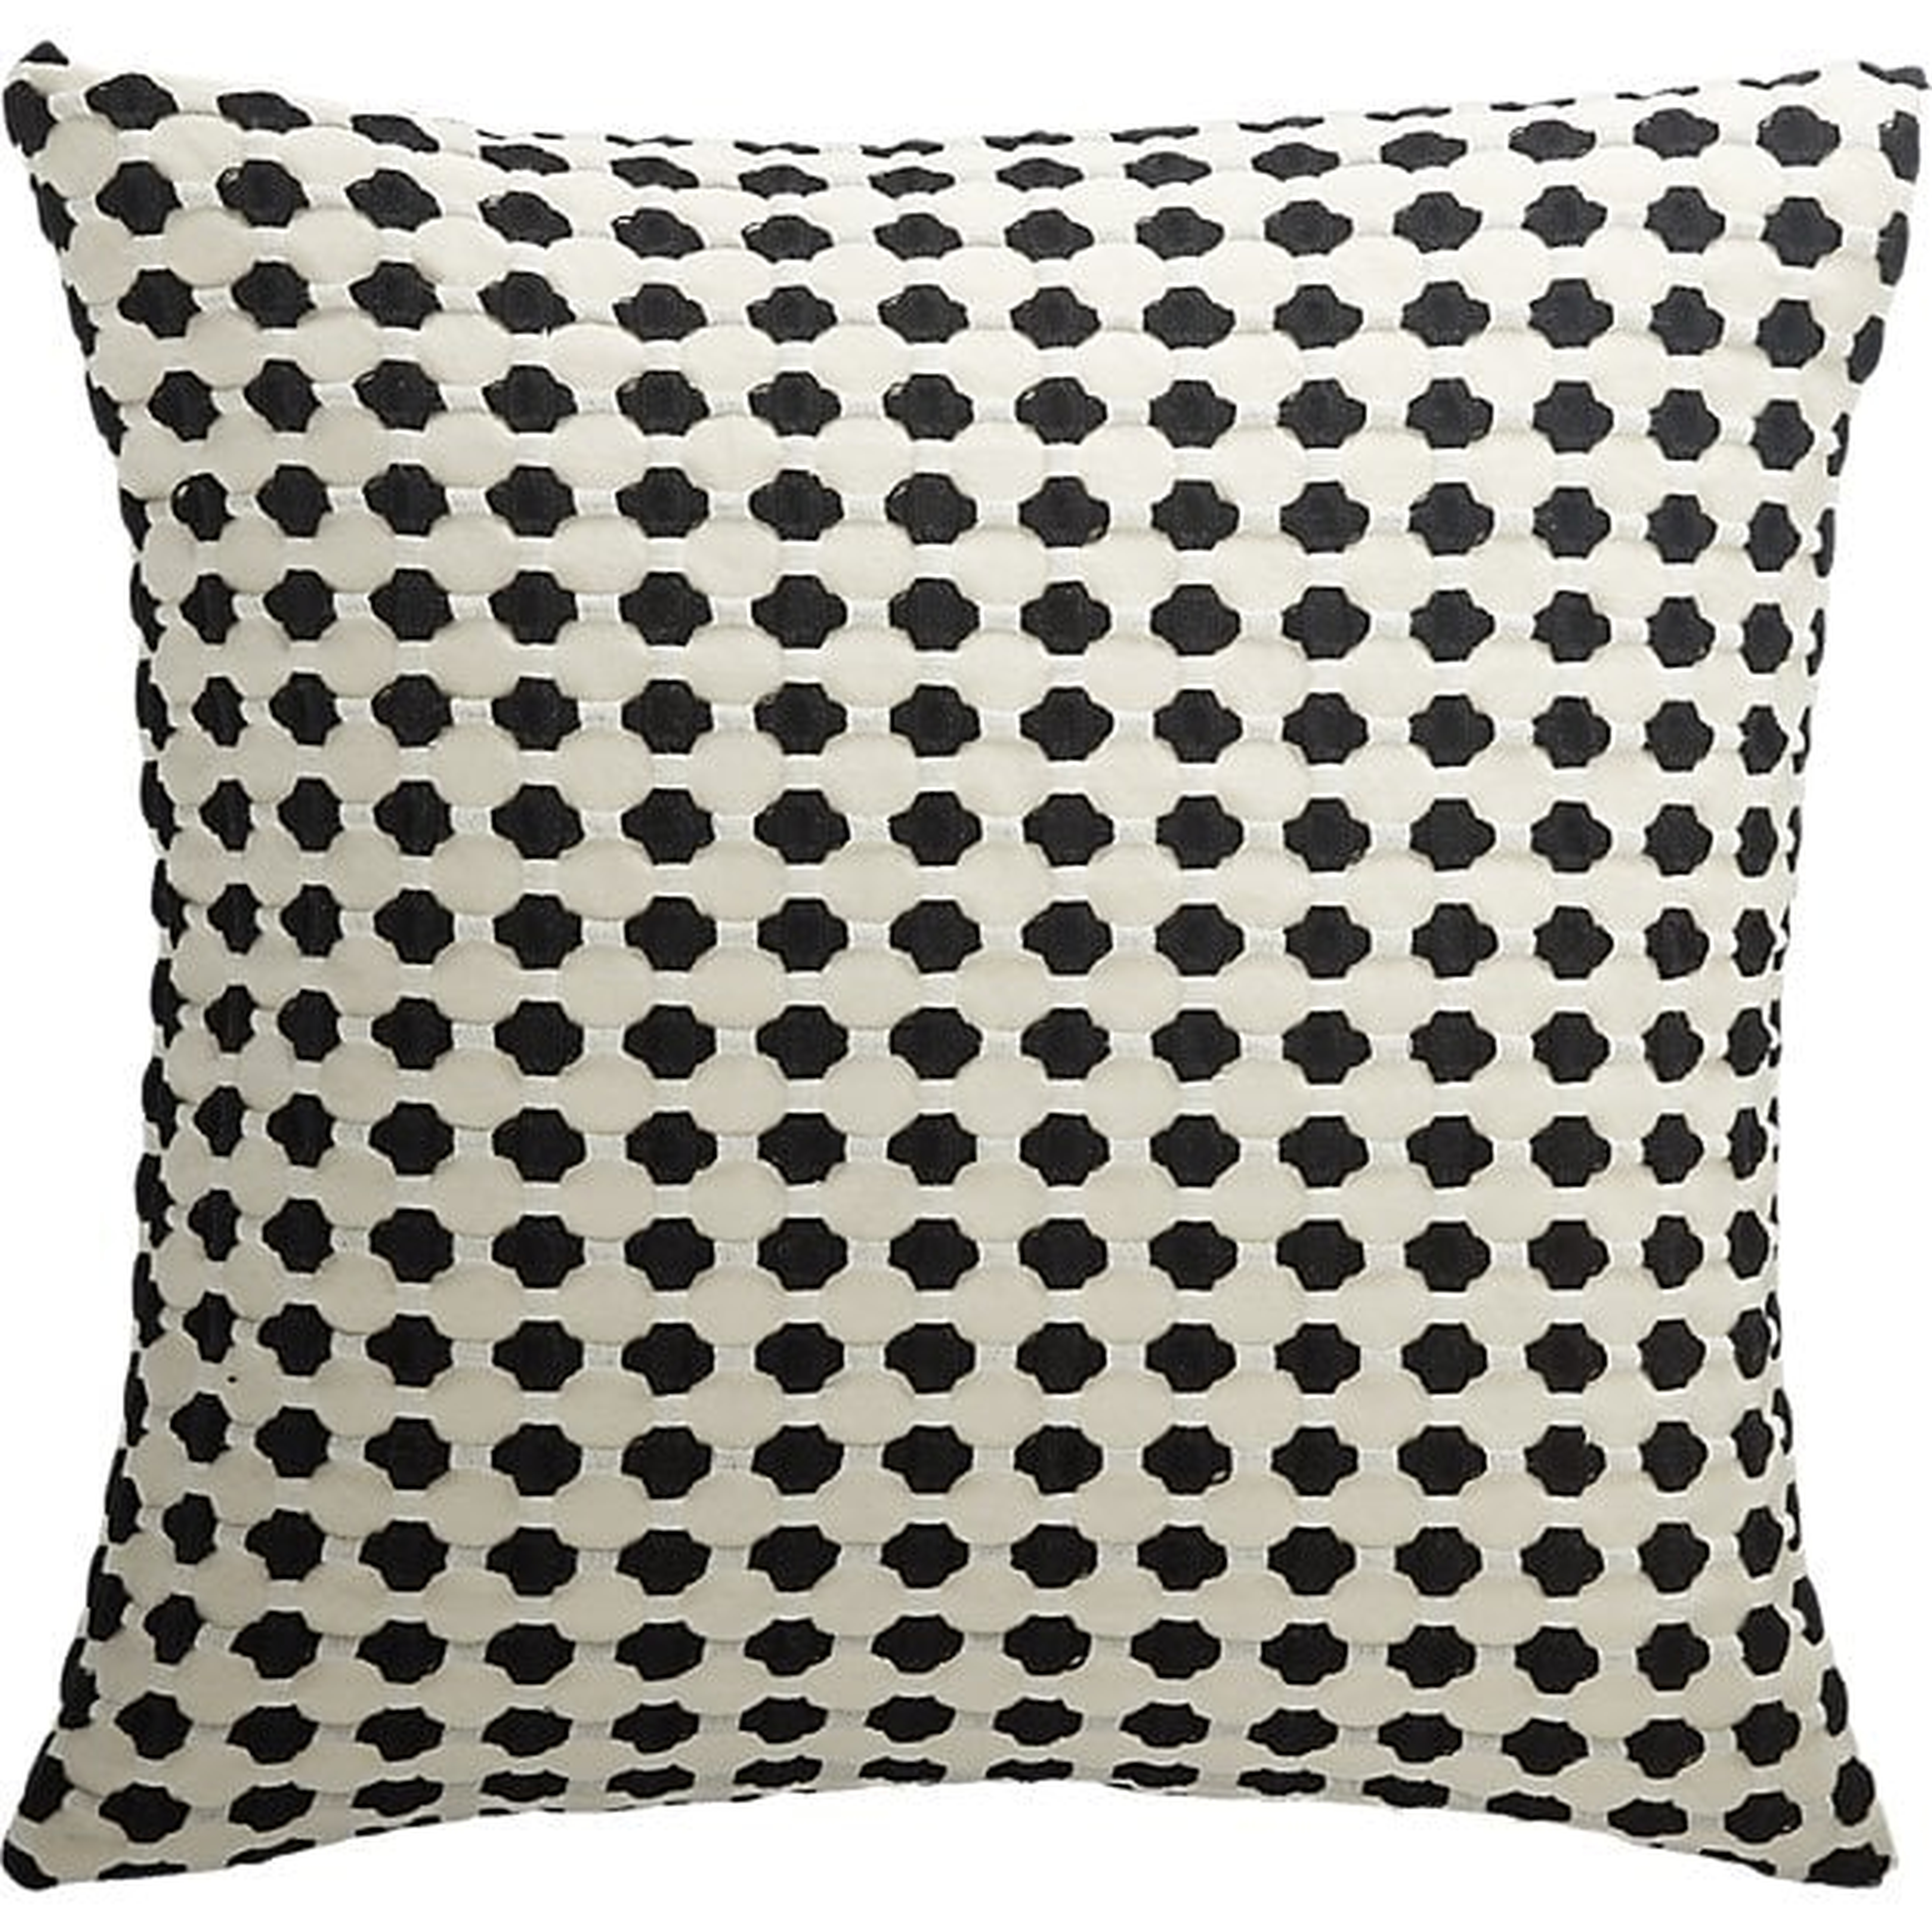 Estela black and white matlesse pillow -  with Feather Down Insert - CB2